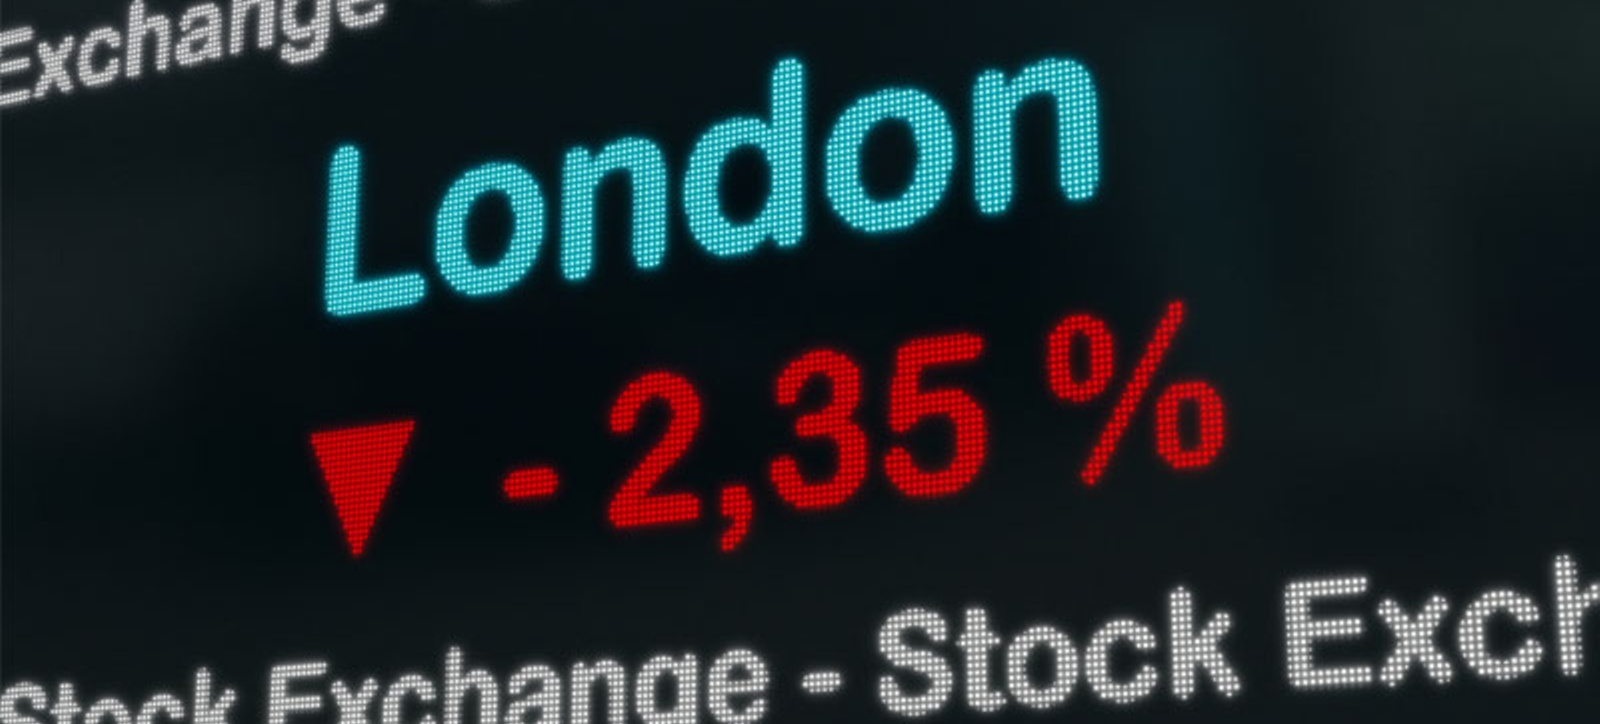 An electronic board displaying share prices at the London Stock Exchange